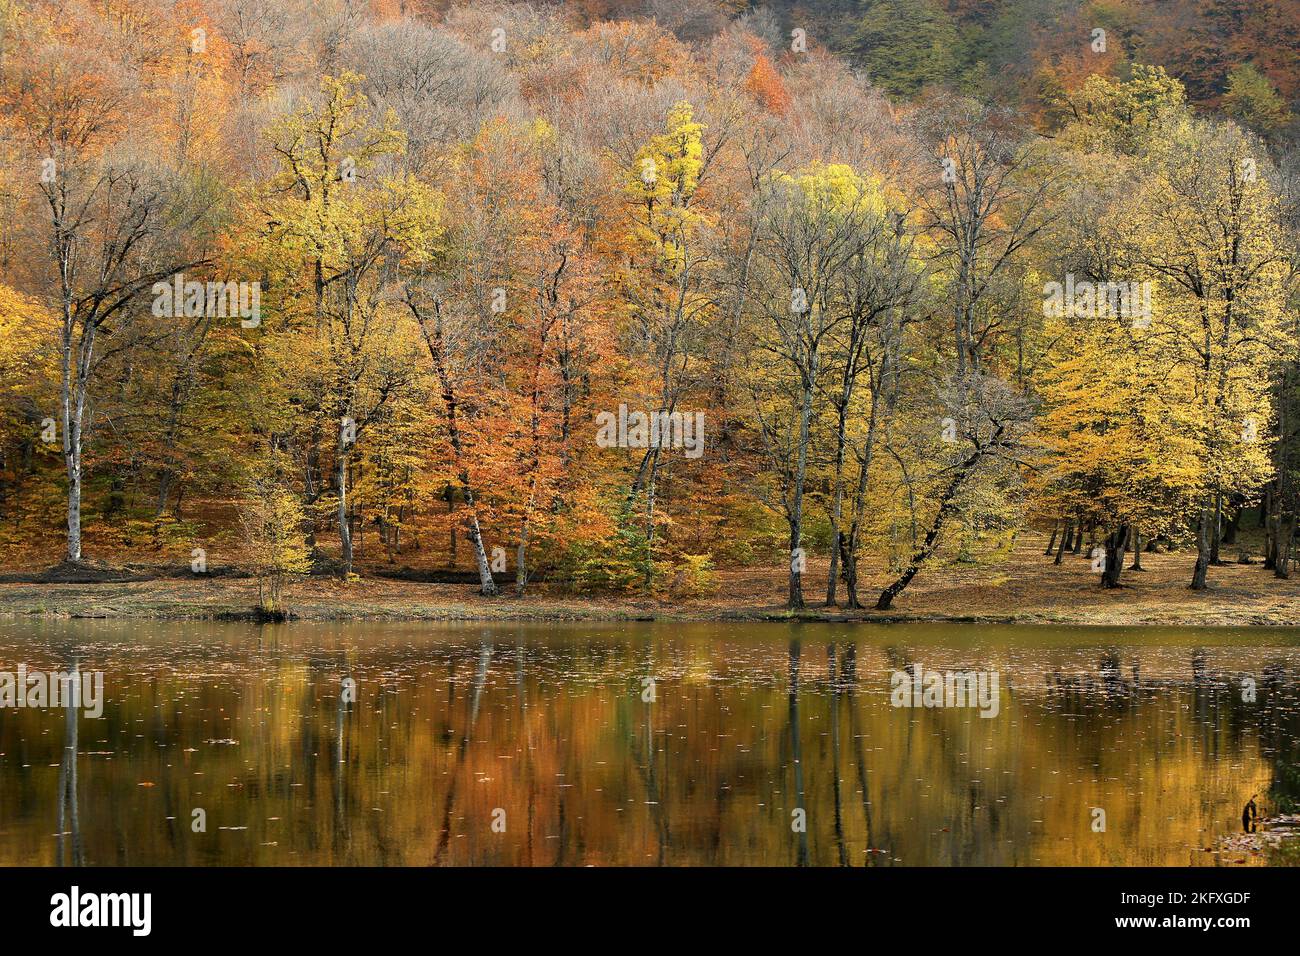 A breathtaking view of the tranquil Gosh lake surrounded by colorful autumn trees in Armenia Stock Photo